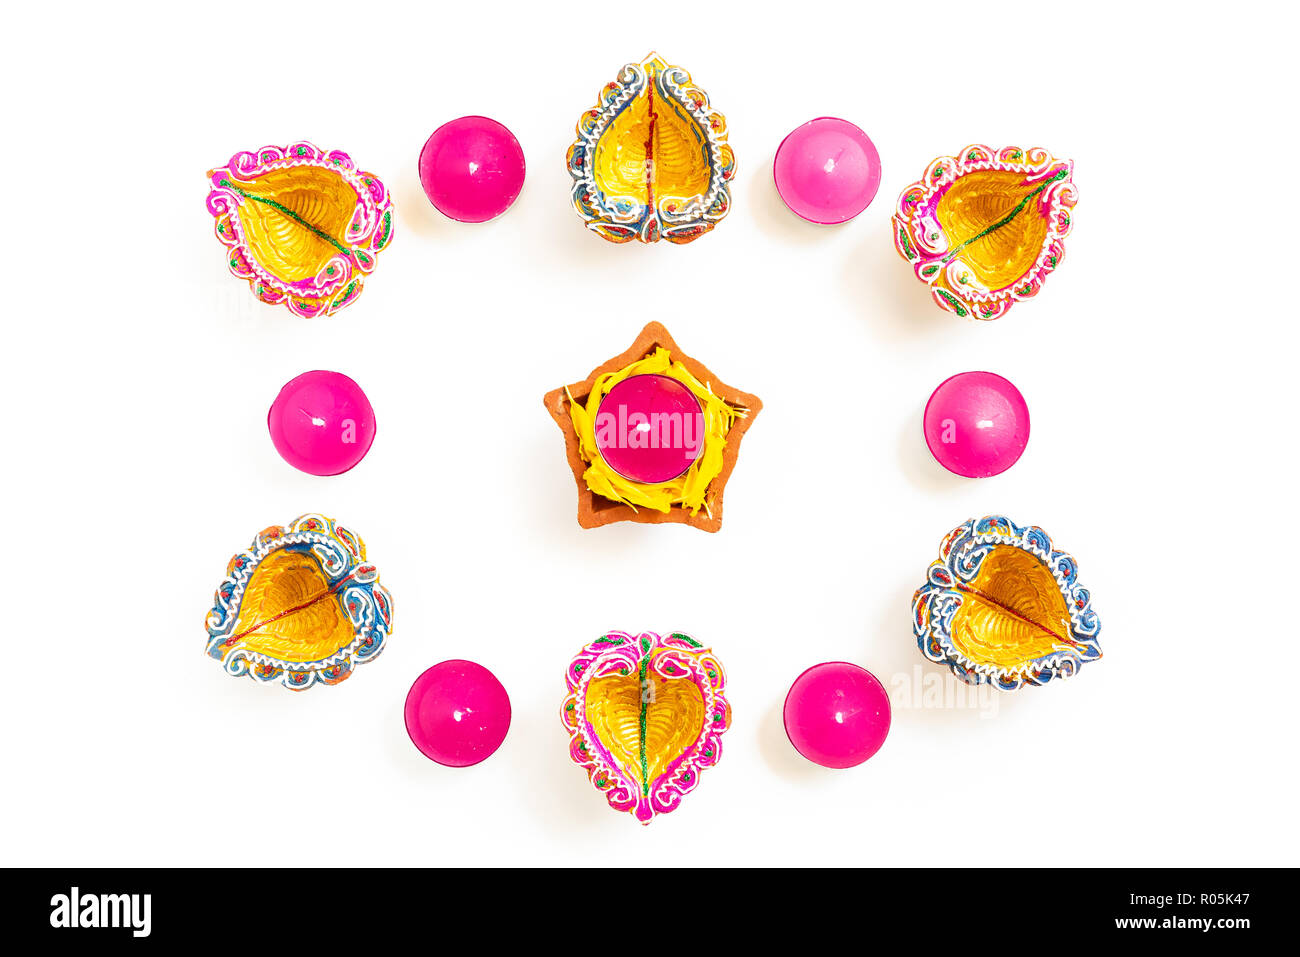 Happy Diwali - Clay Diya lamps lit during Dipavali, Hindu festival of lights celebration. Colorful traditional oil lamp diya on white background Stock Photo